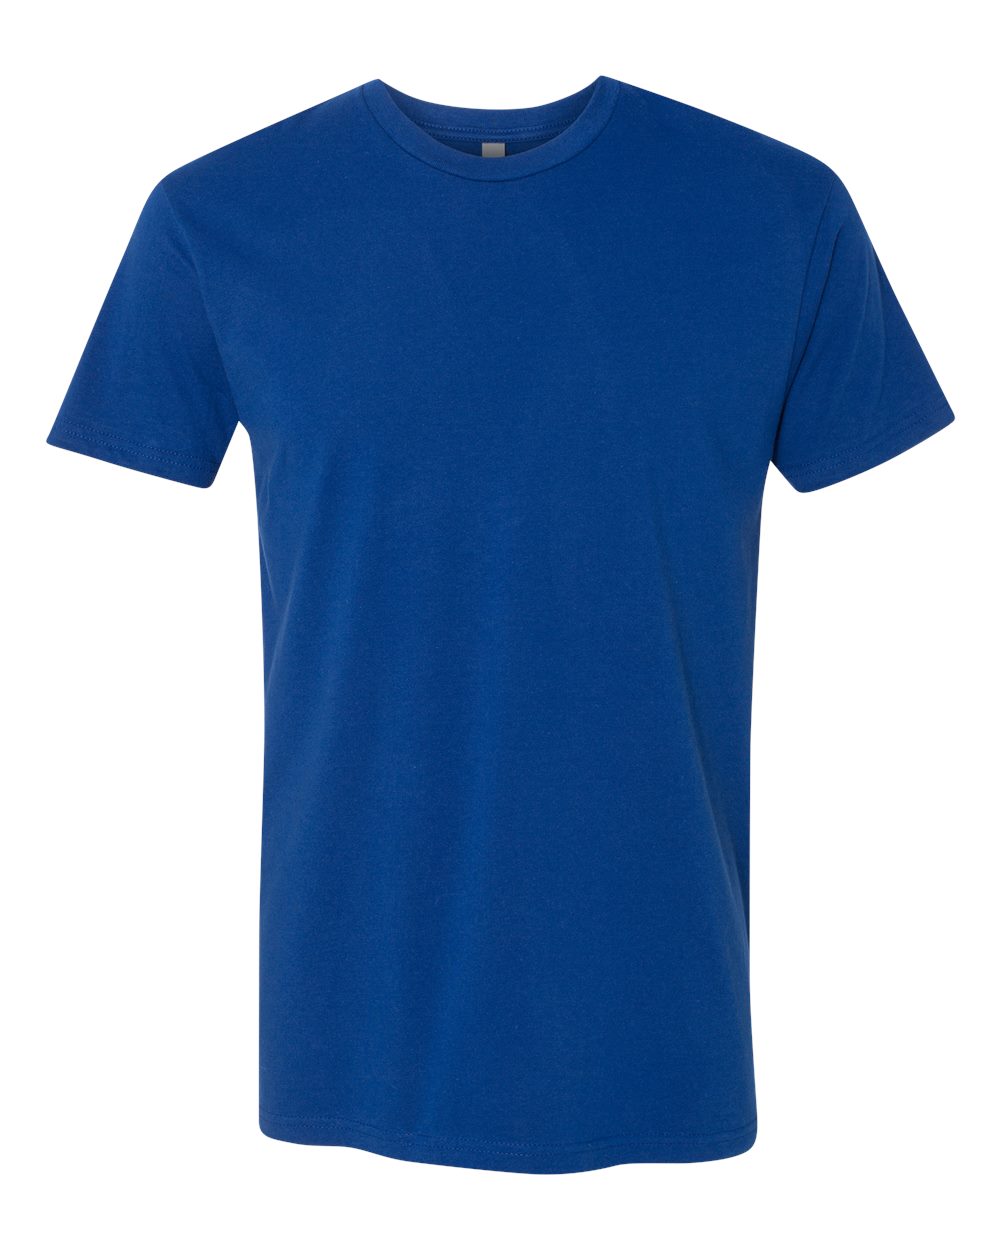 Next Level Cotton Tee (3600) in Royal